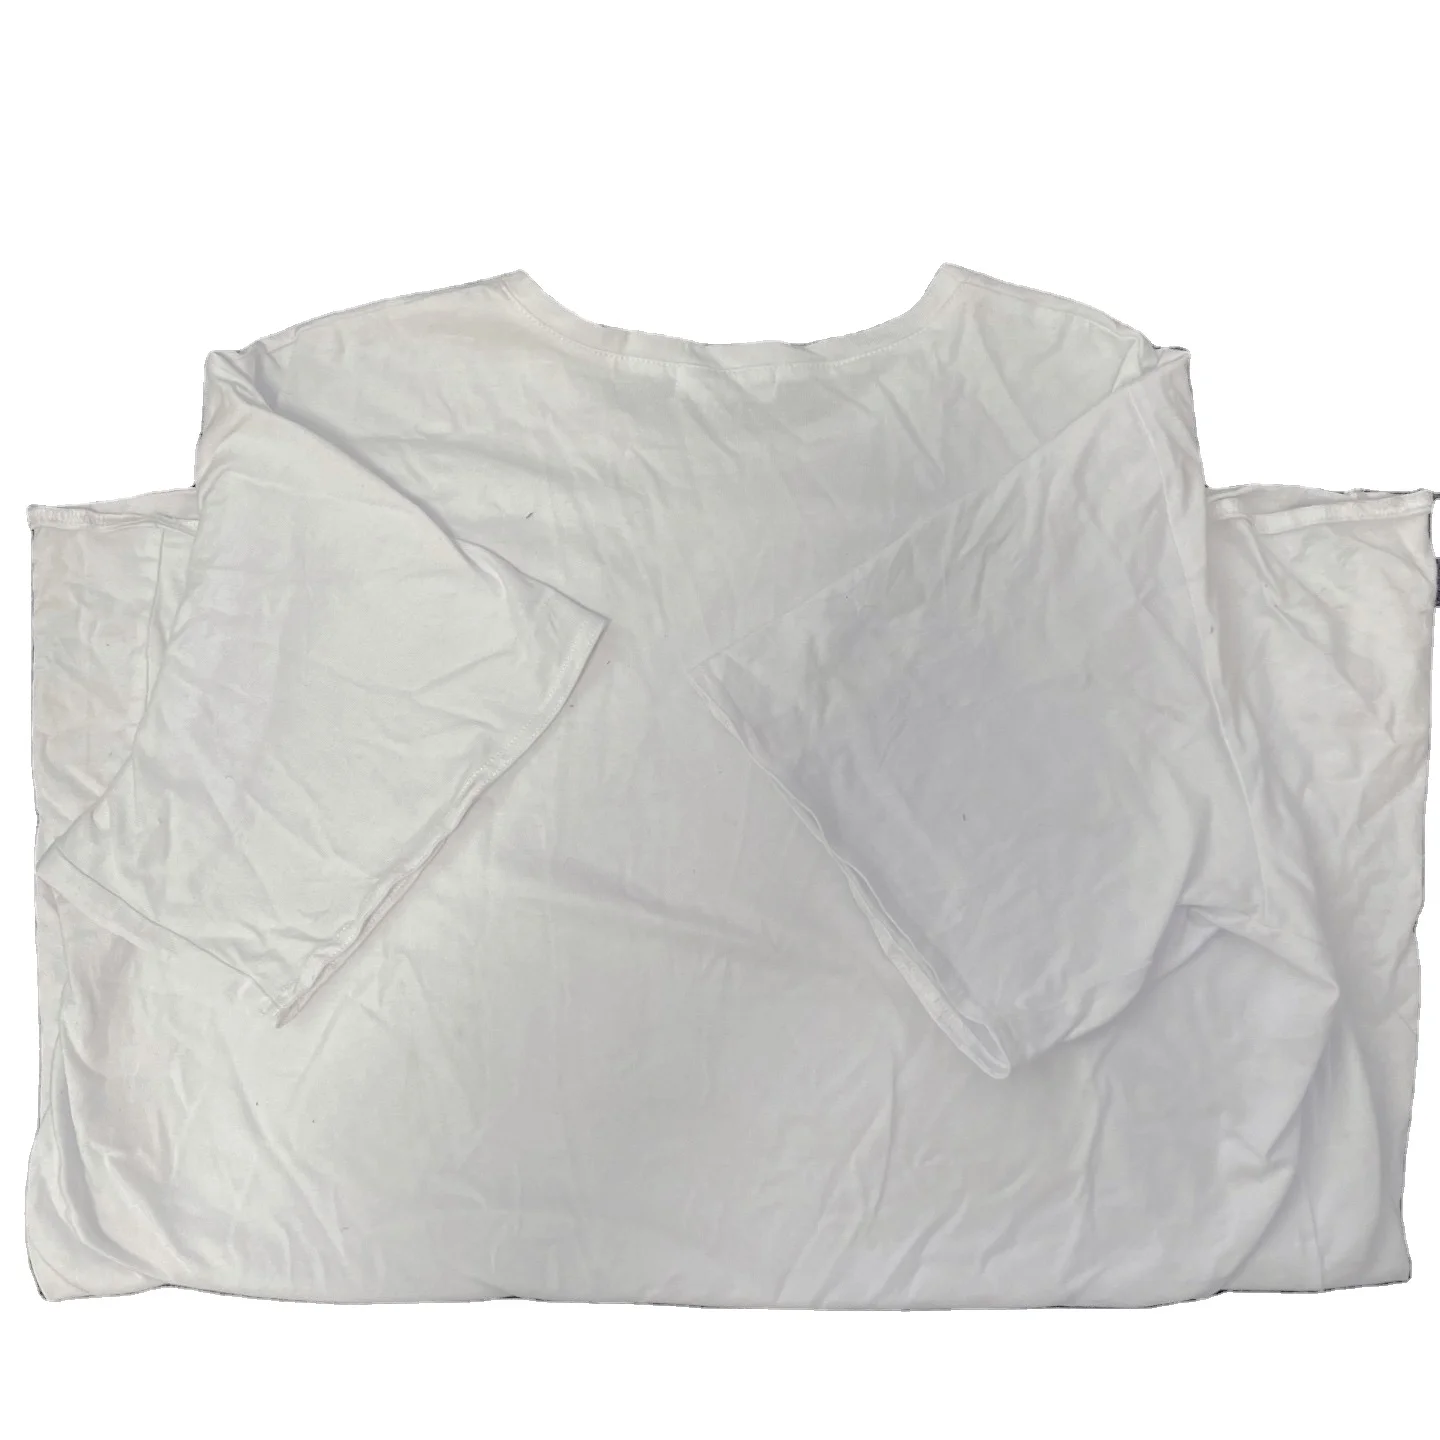 Best quality  White Color T shirt Wiping Rags 80% 100% cotton wiping rags from China 5 kg 10 kg 20kg 100kg bale (1600681977826)